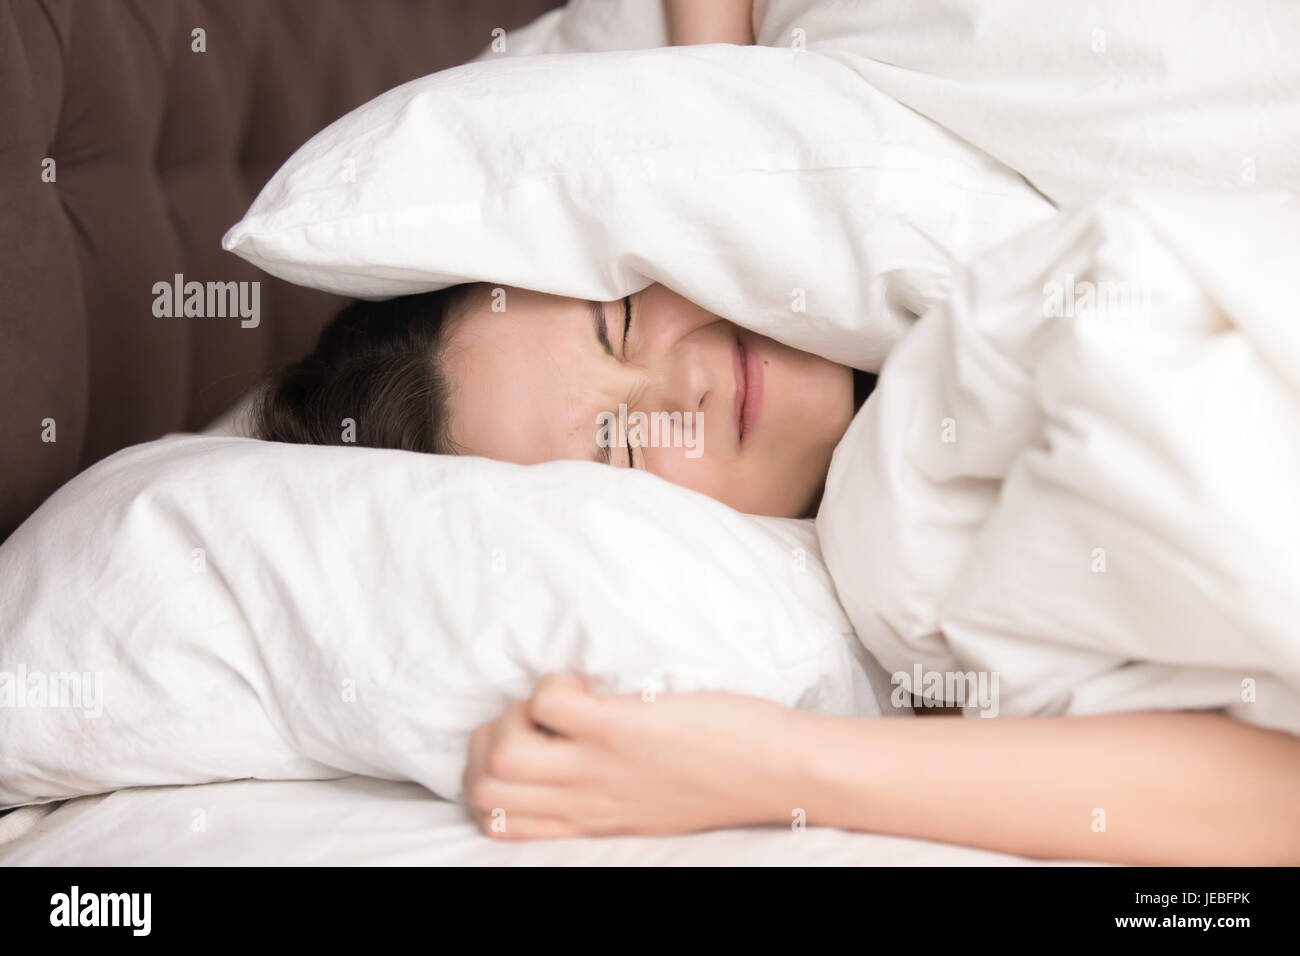 Woman covering head with pillow because of noise Stock Photo